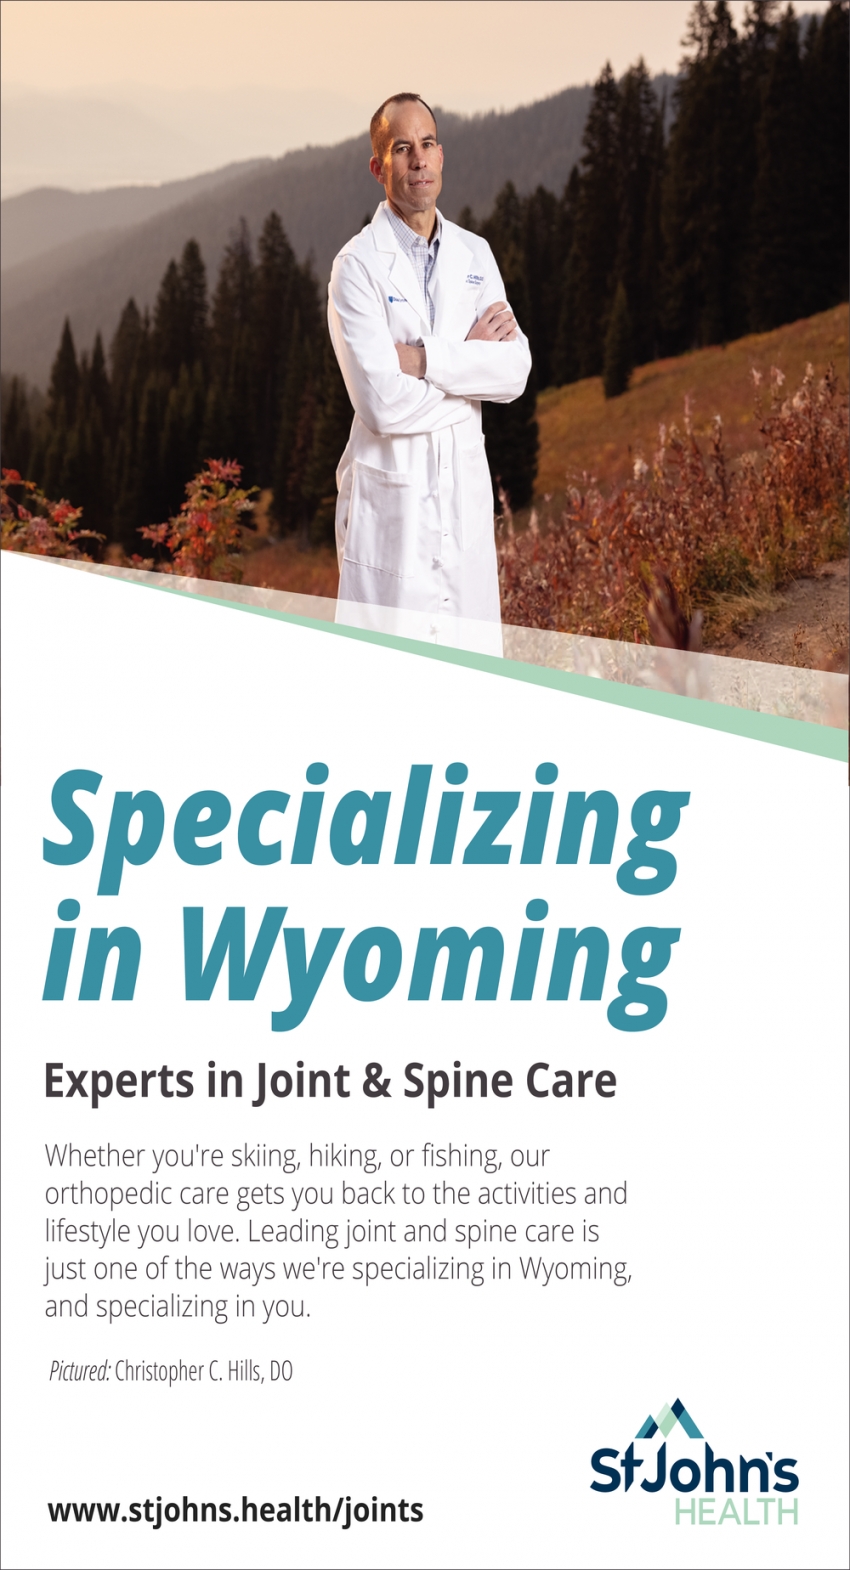 Specializing In Wyoming